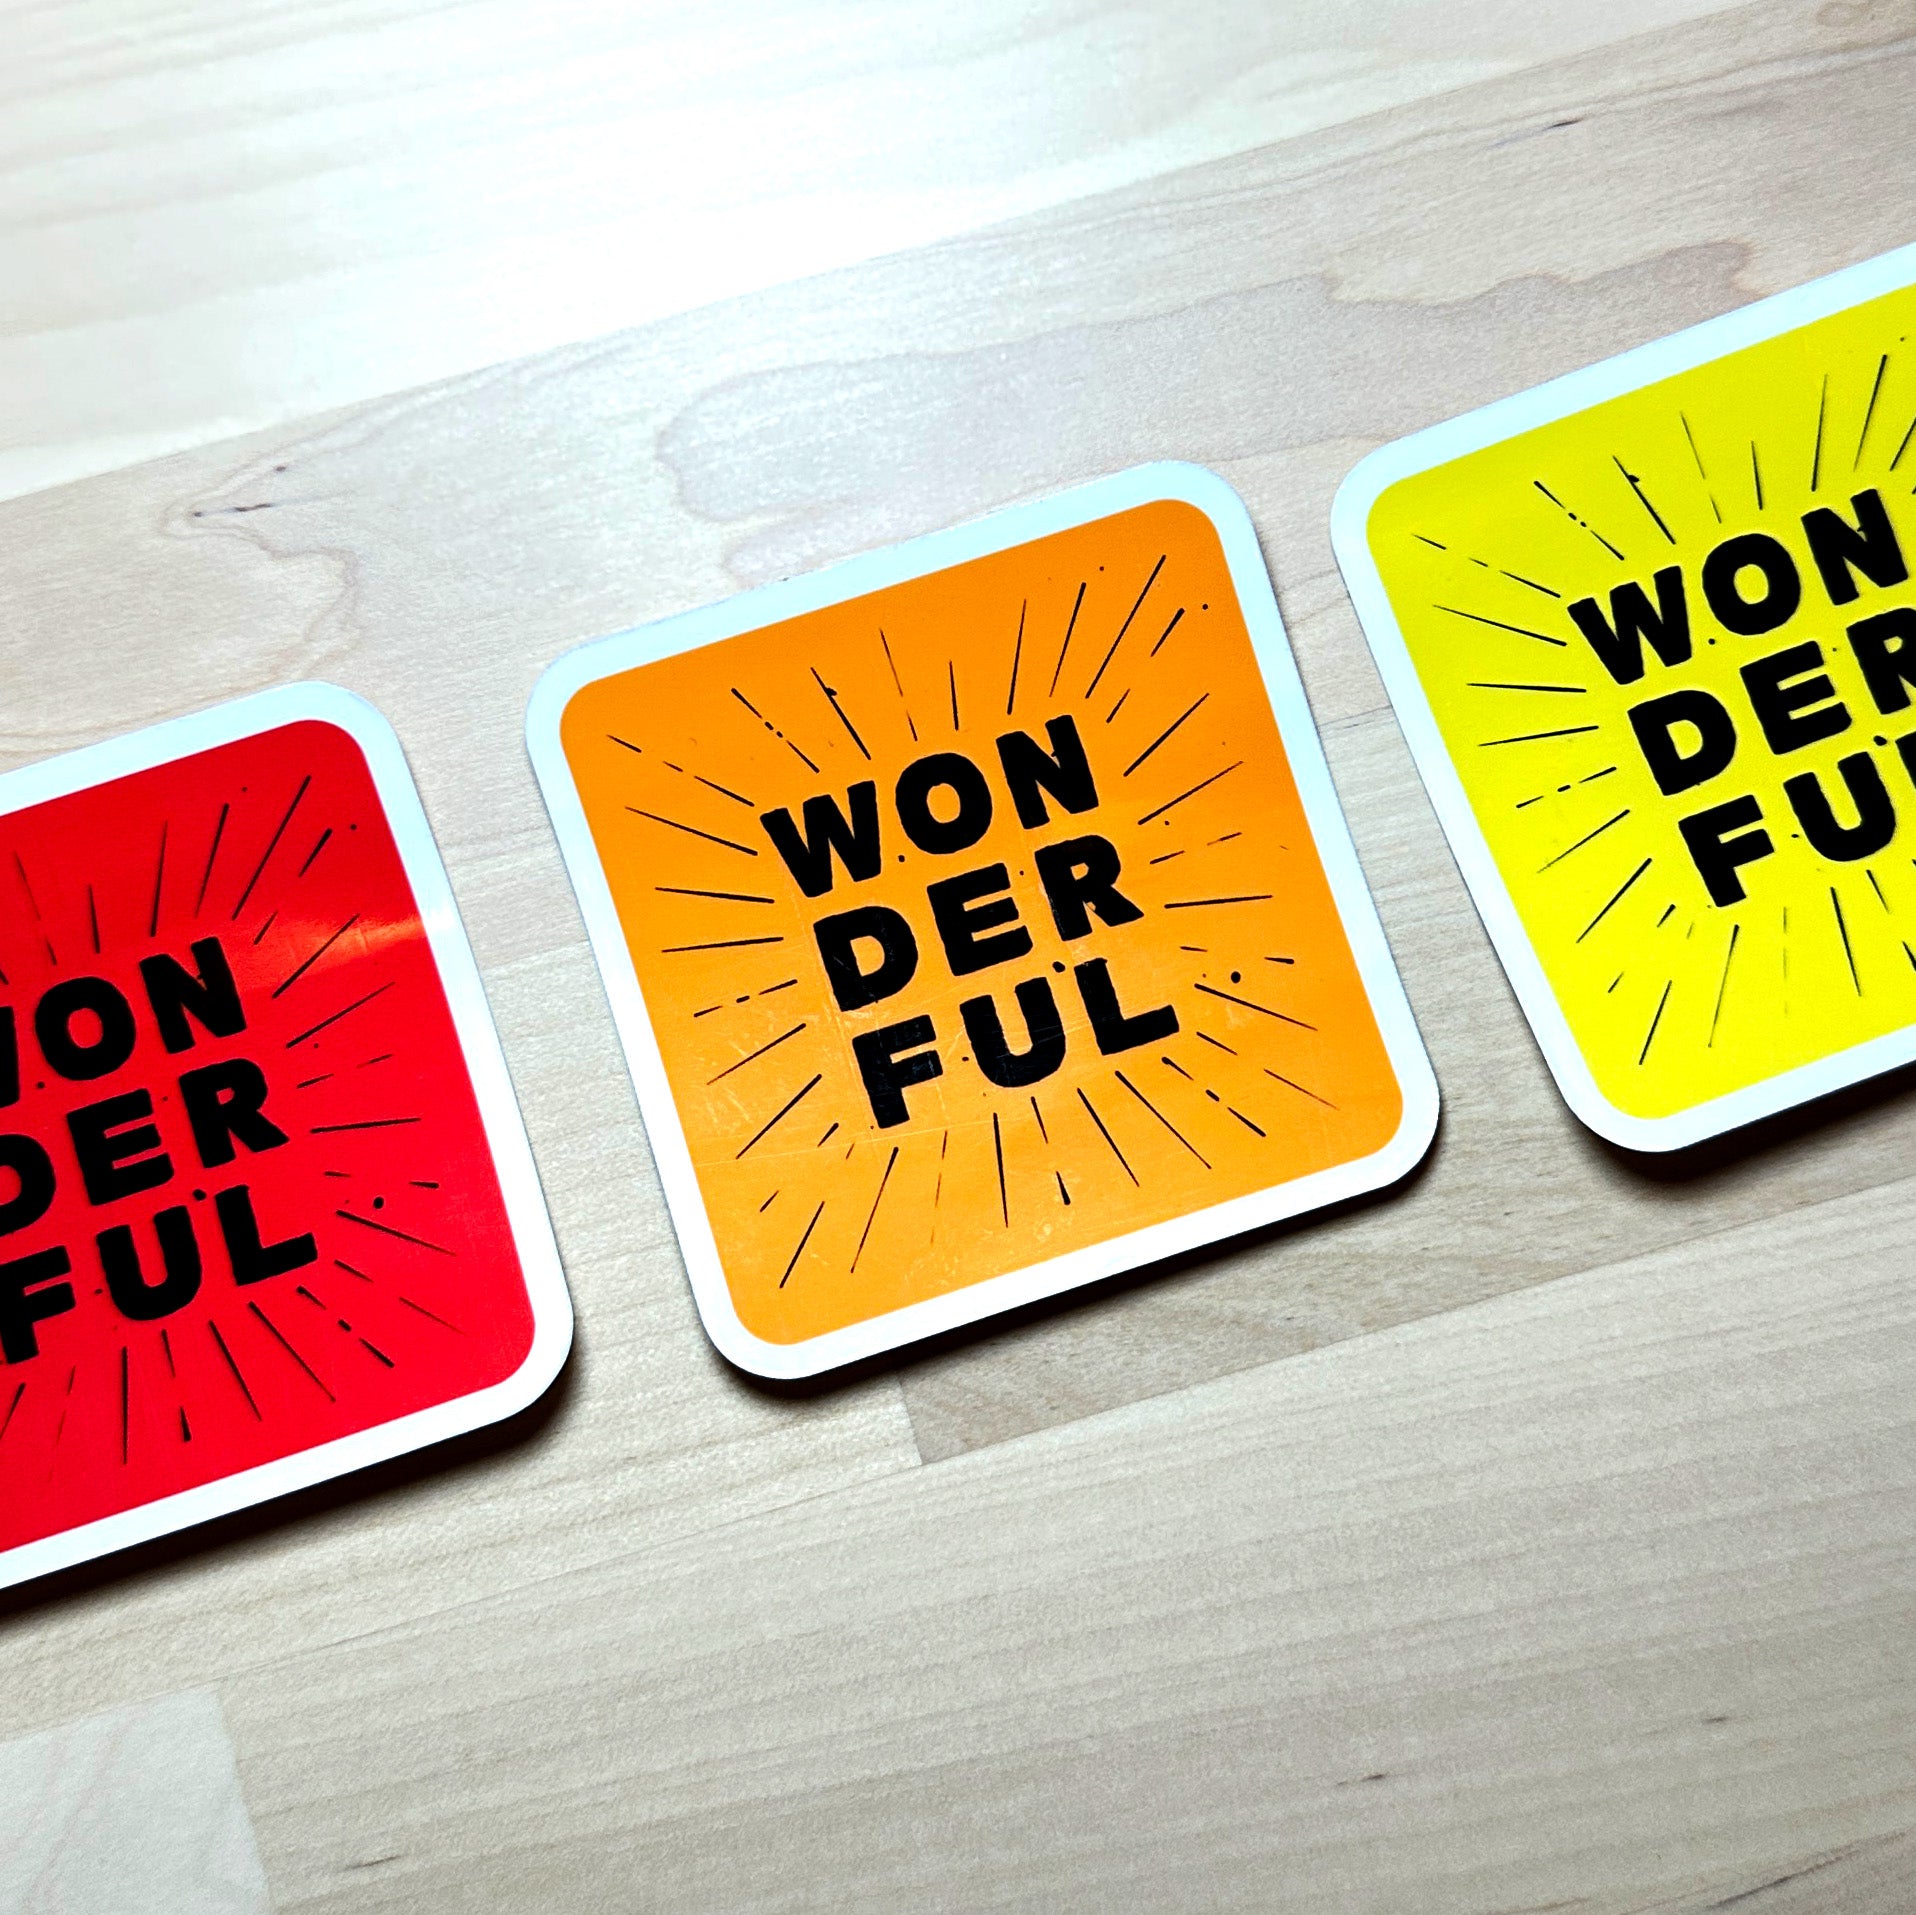 photo of 3 waterproof vinyl sticker with the word wonderful in 3 layers of black text on red, orange, and yellow background